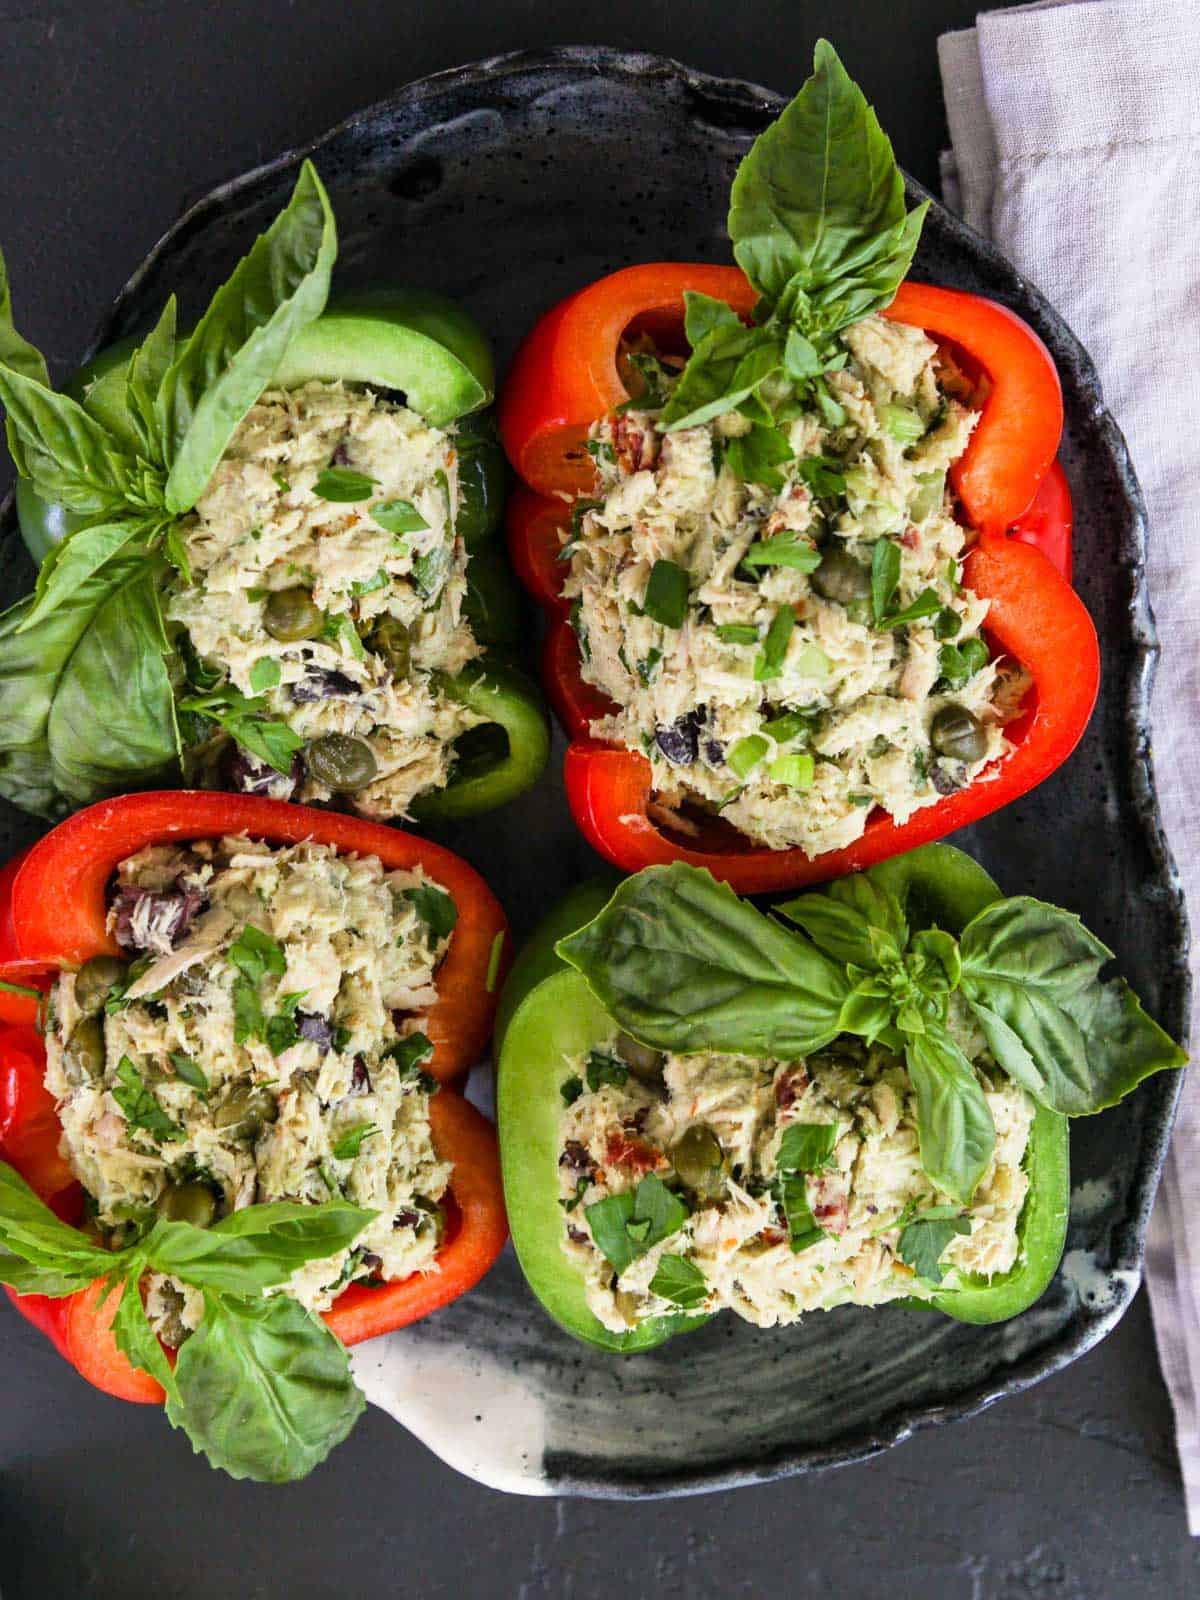 Four Bell Pepper halves filled with Tuna Salad garnished with fresh basil.